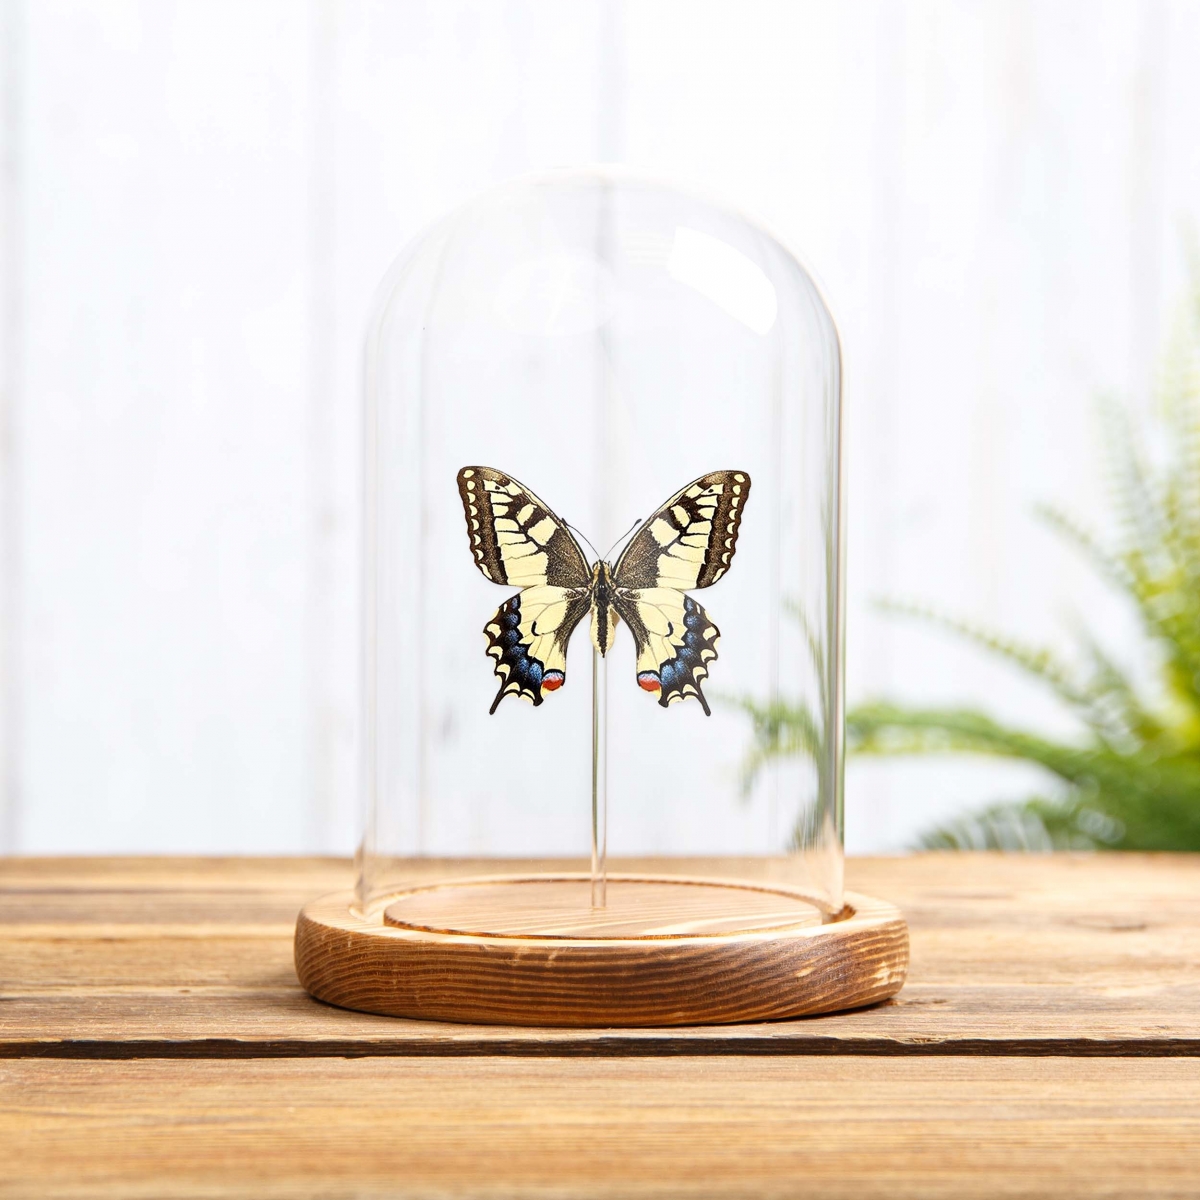 Old World Swallowtail in Glass Dome with Wooden Base (Papilio machaon)